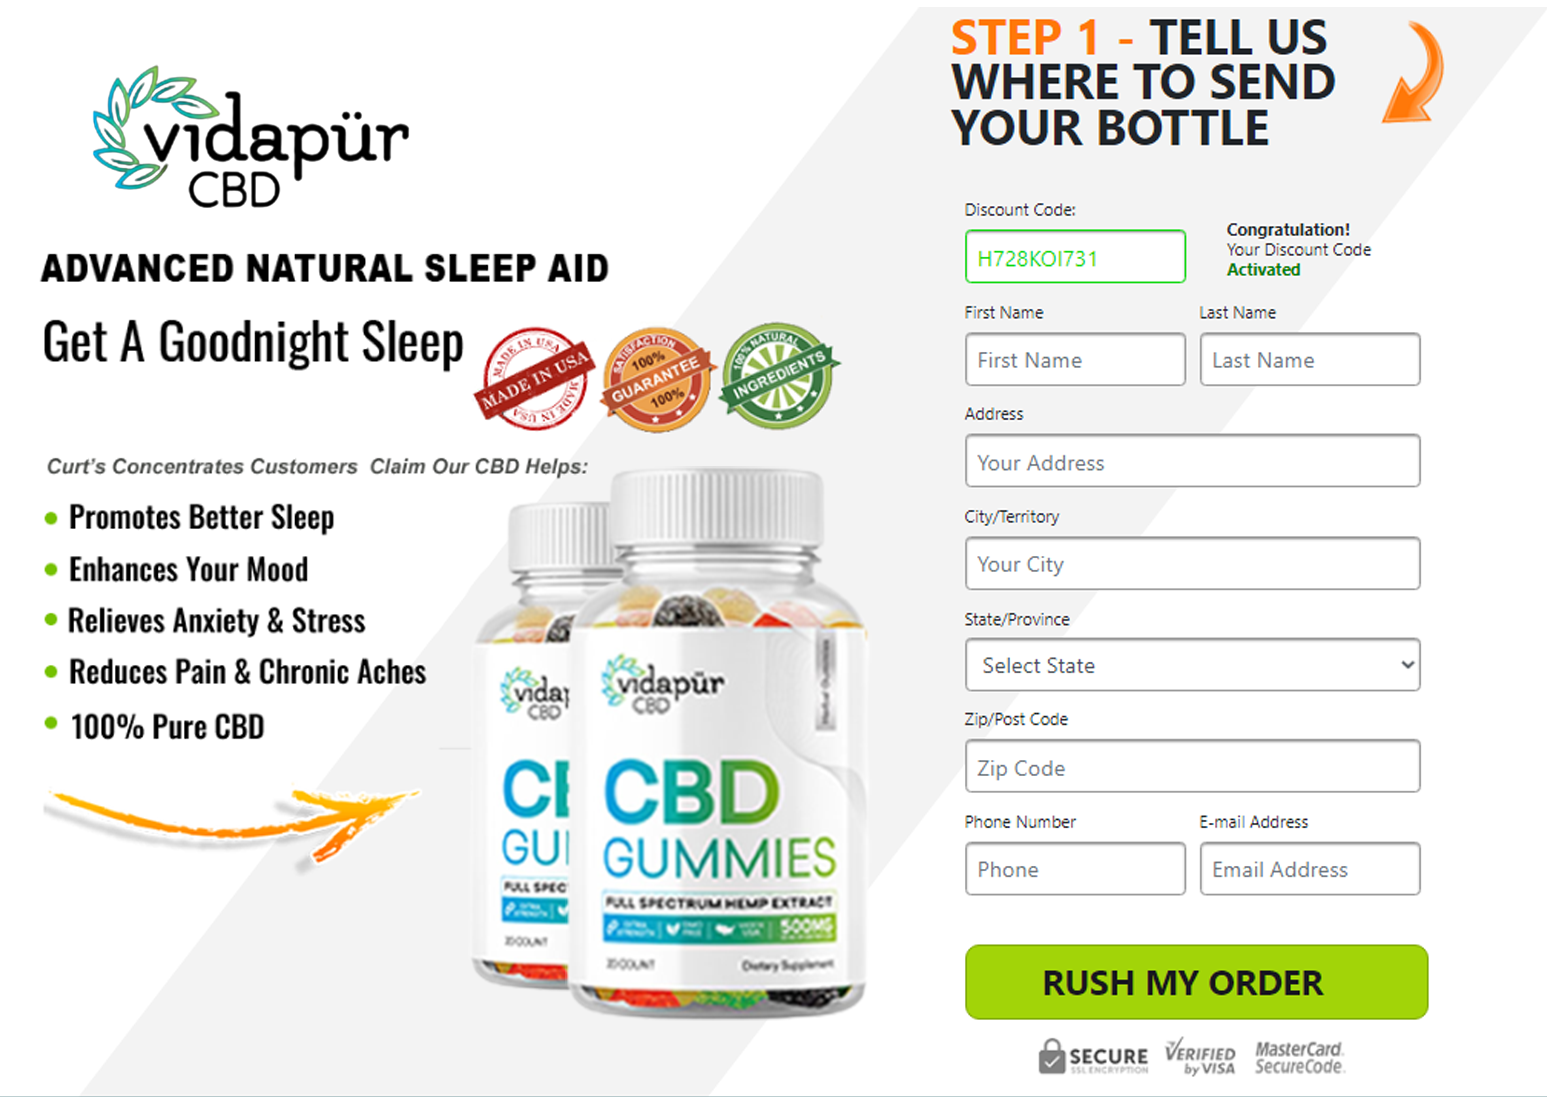 atlassian / personal-issue-templates / issues / #65458 - Vidapur CBD Gummies  (PAIN + STRESS RELIEF GUMMIES) SHOULD YOU BUY OR NOT? — Bitbucket